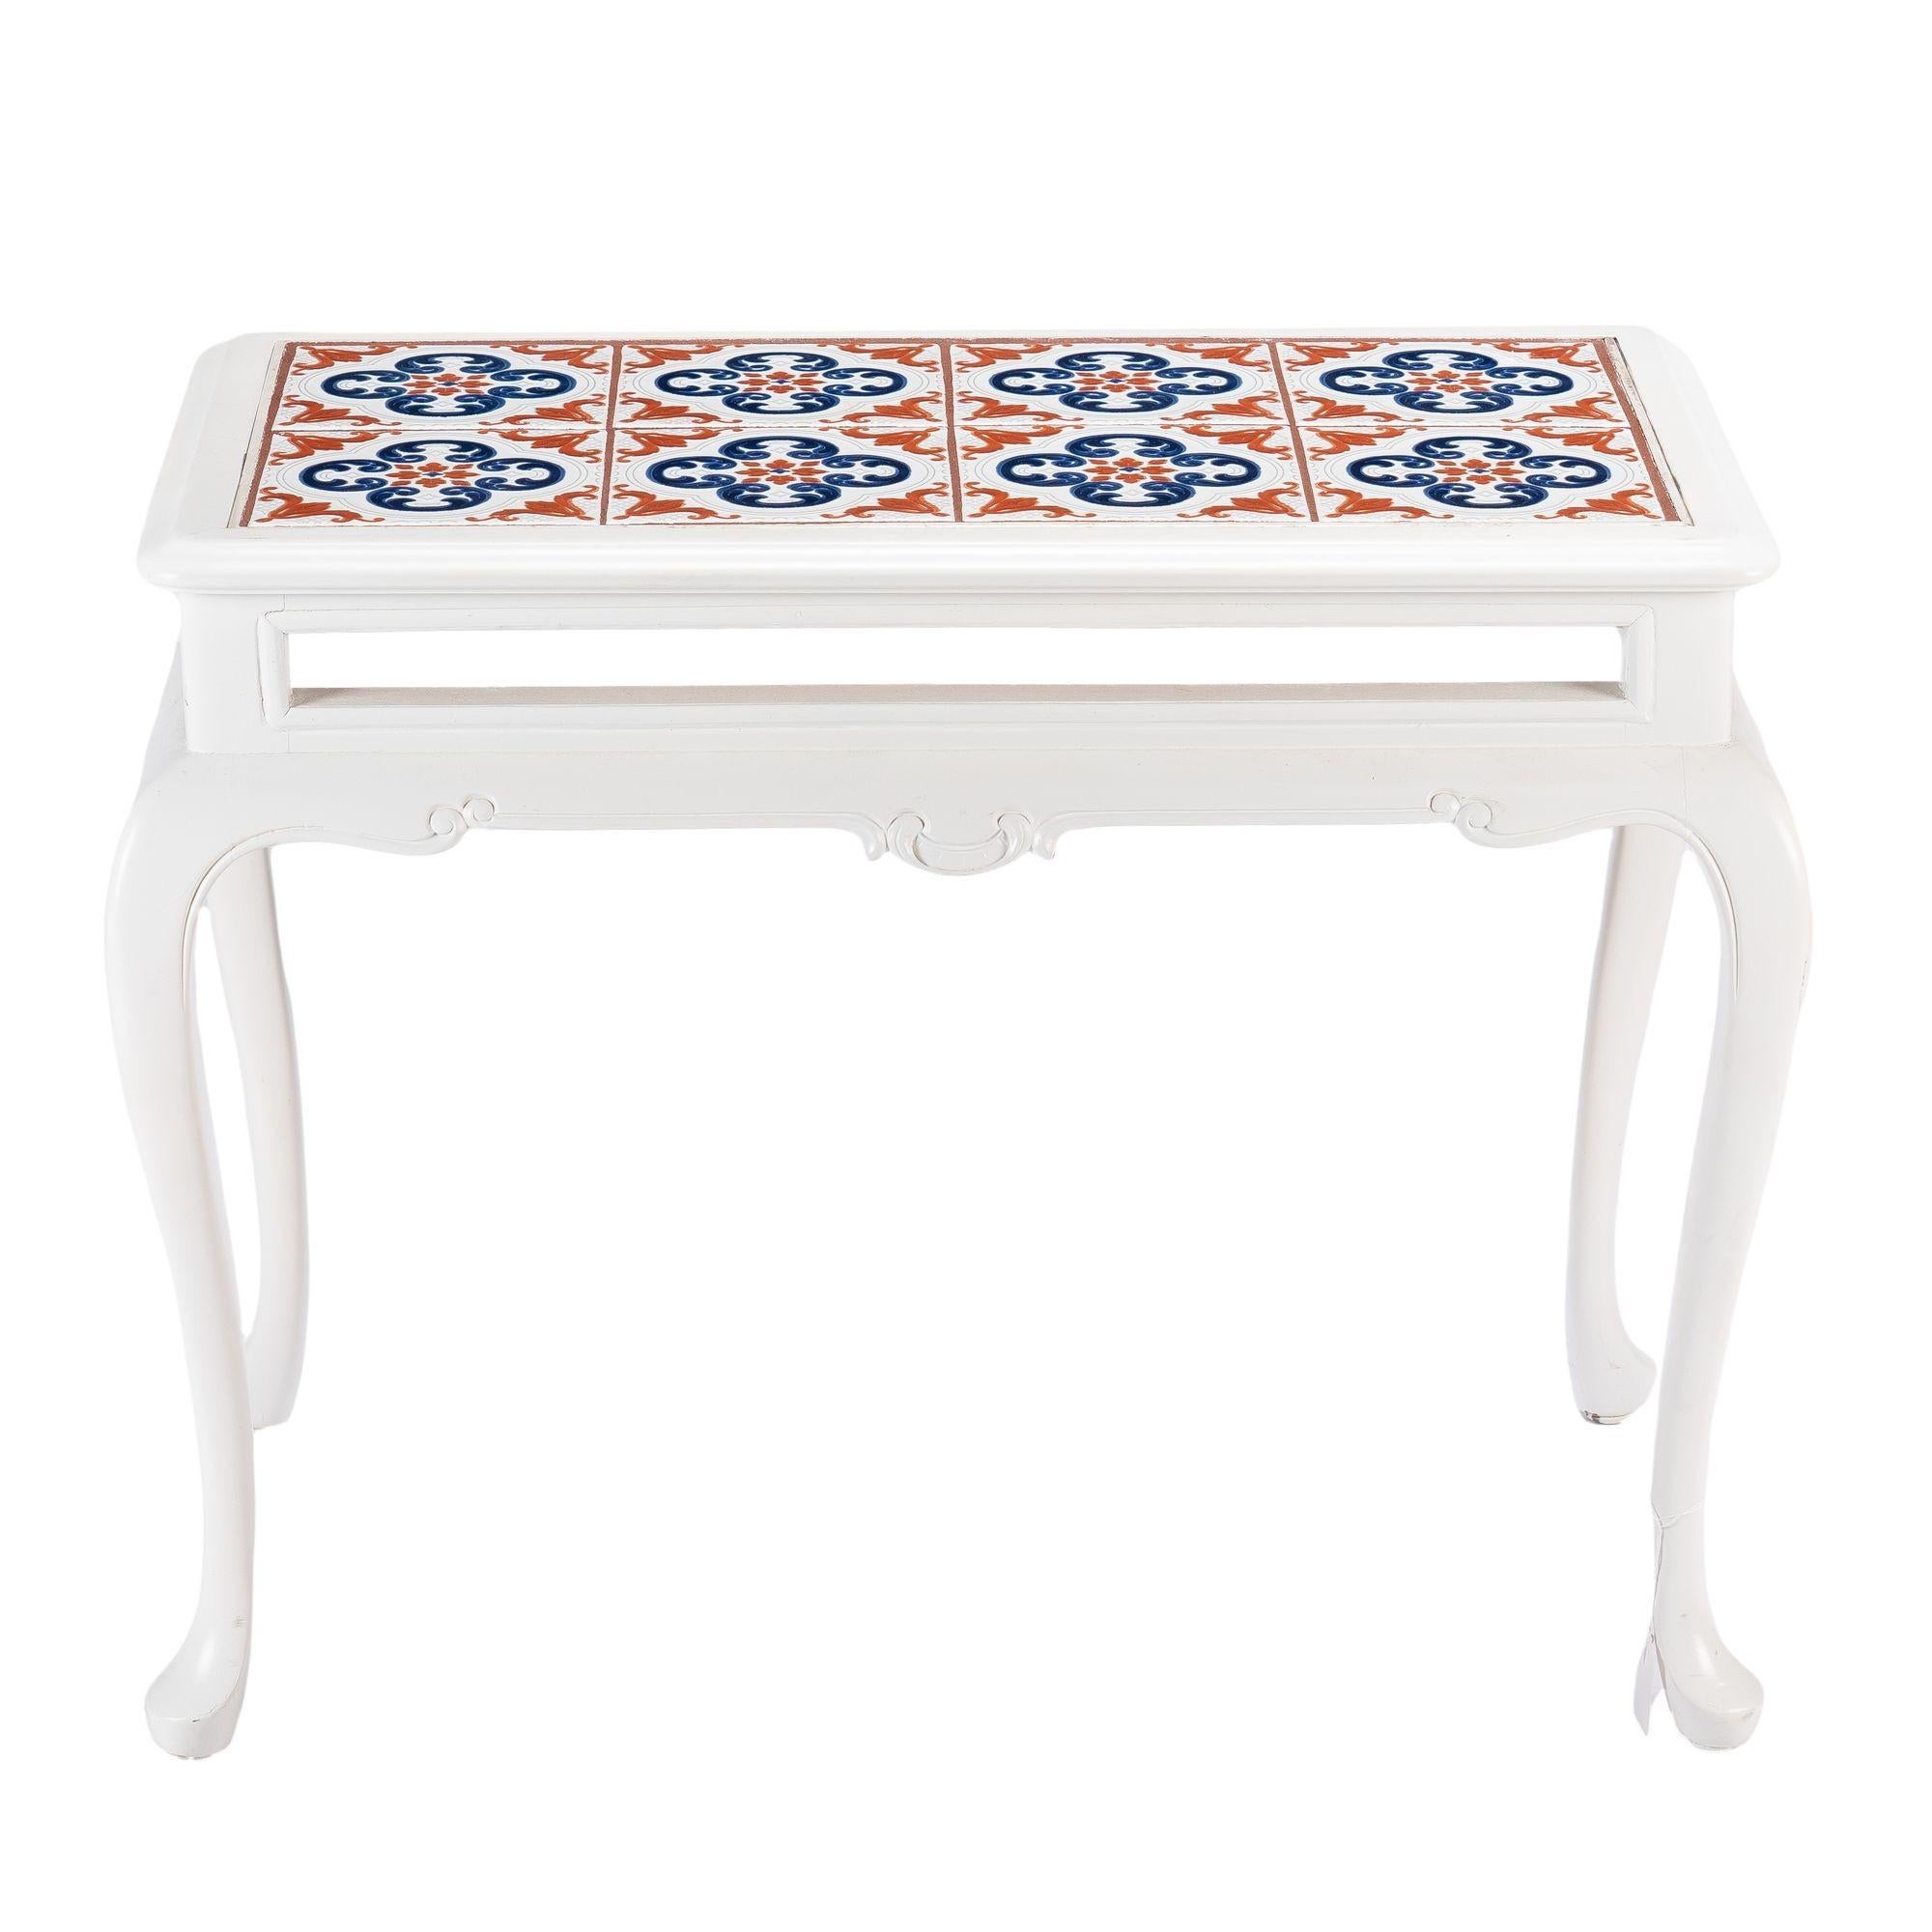 Painted Queen Anne style hardwood coffee table, fitted with oxide red & cobalt blue decorated white French ceramic tiles.
American, Academic Revival, mid 20th century.